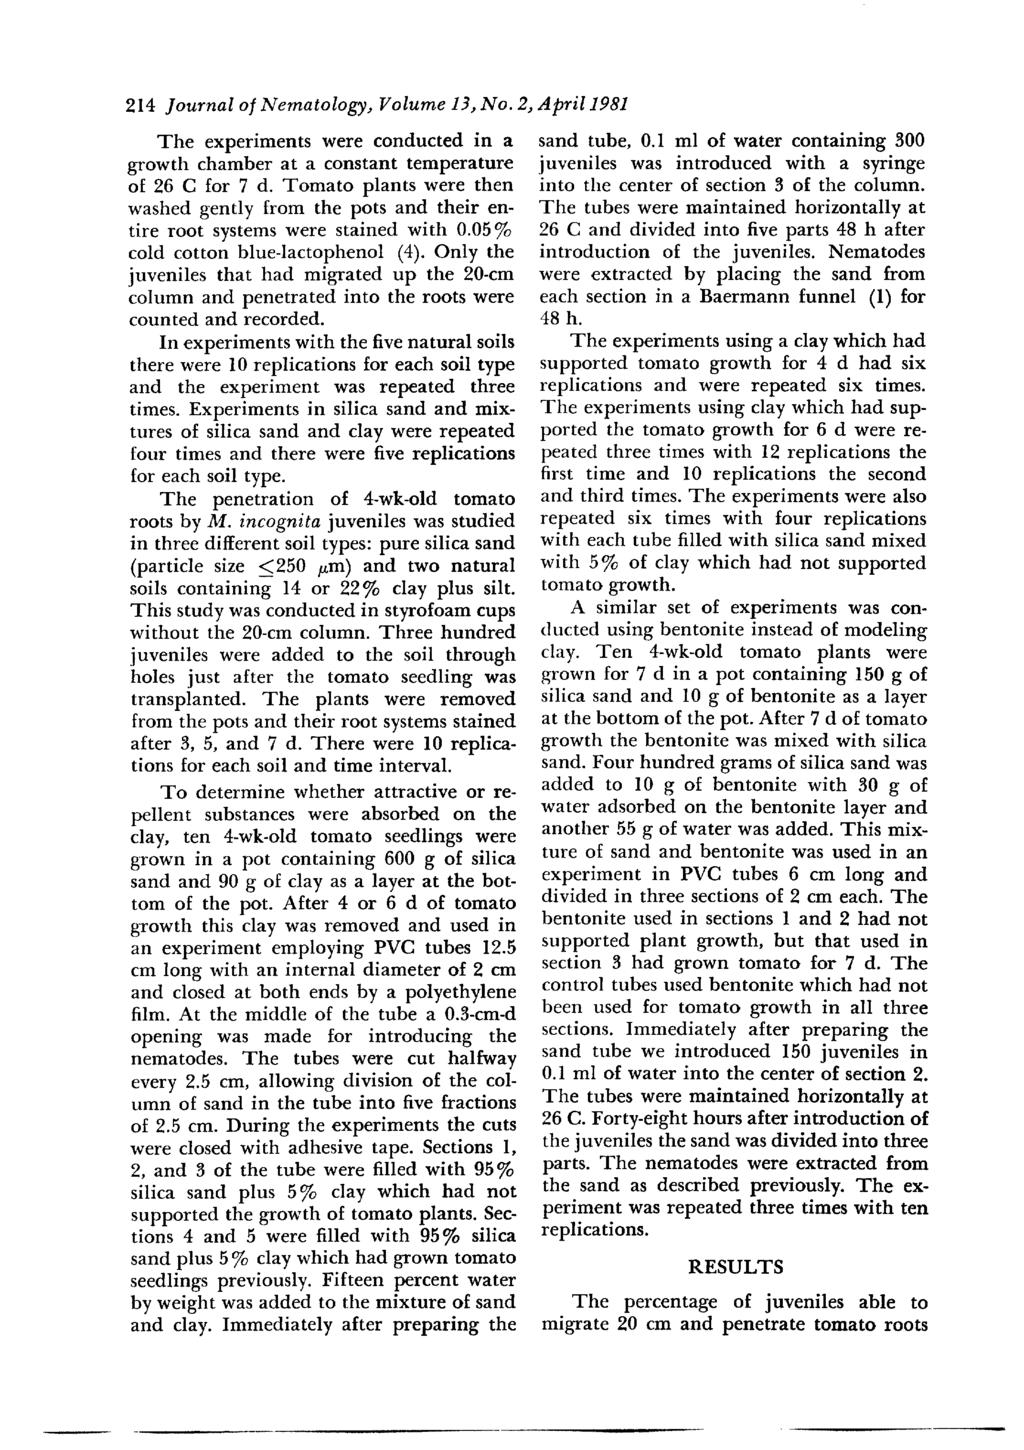 214 Journal of Nematology, Volume 13, No. 2, April 1981 The experiments were nducted in a growth chamber at a nstant temperature of 26 C for 7 d.